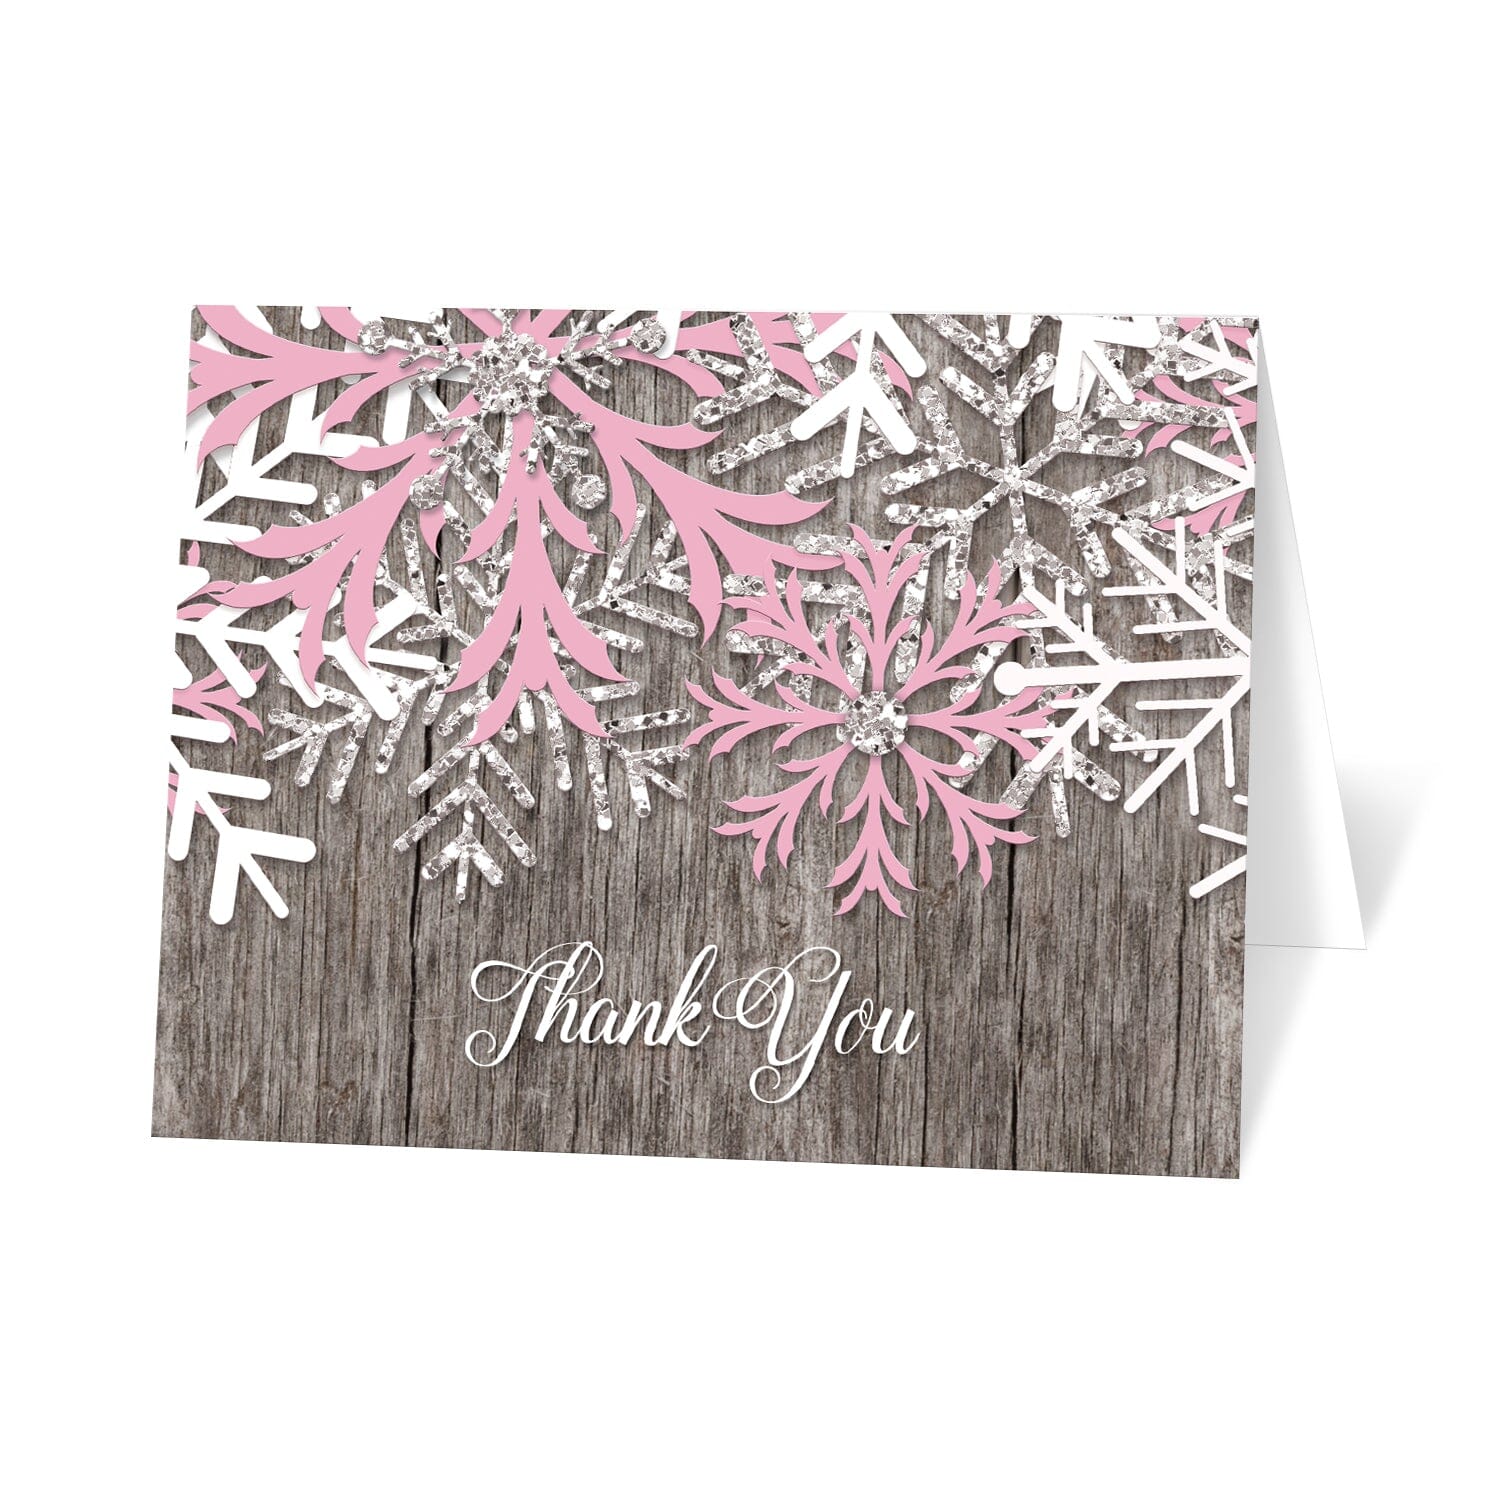 Rustic Winter Wood Pink Snowflake Thank You Cards at Artistically Invited.